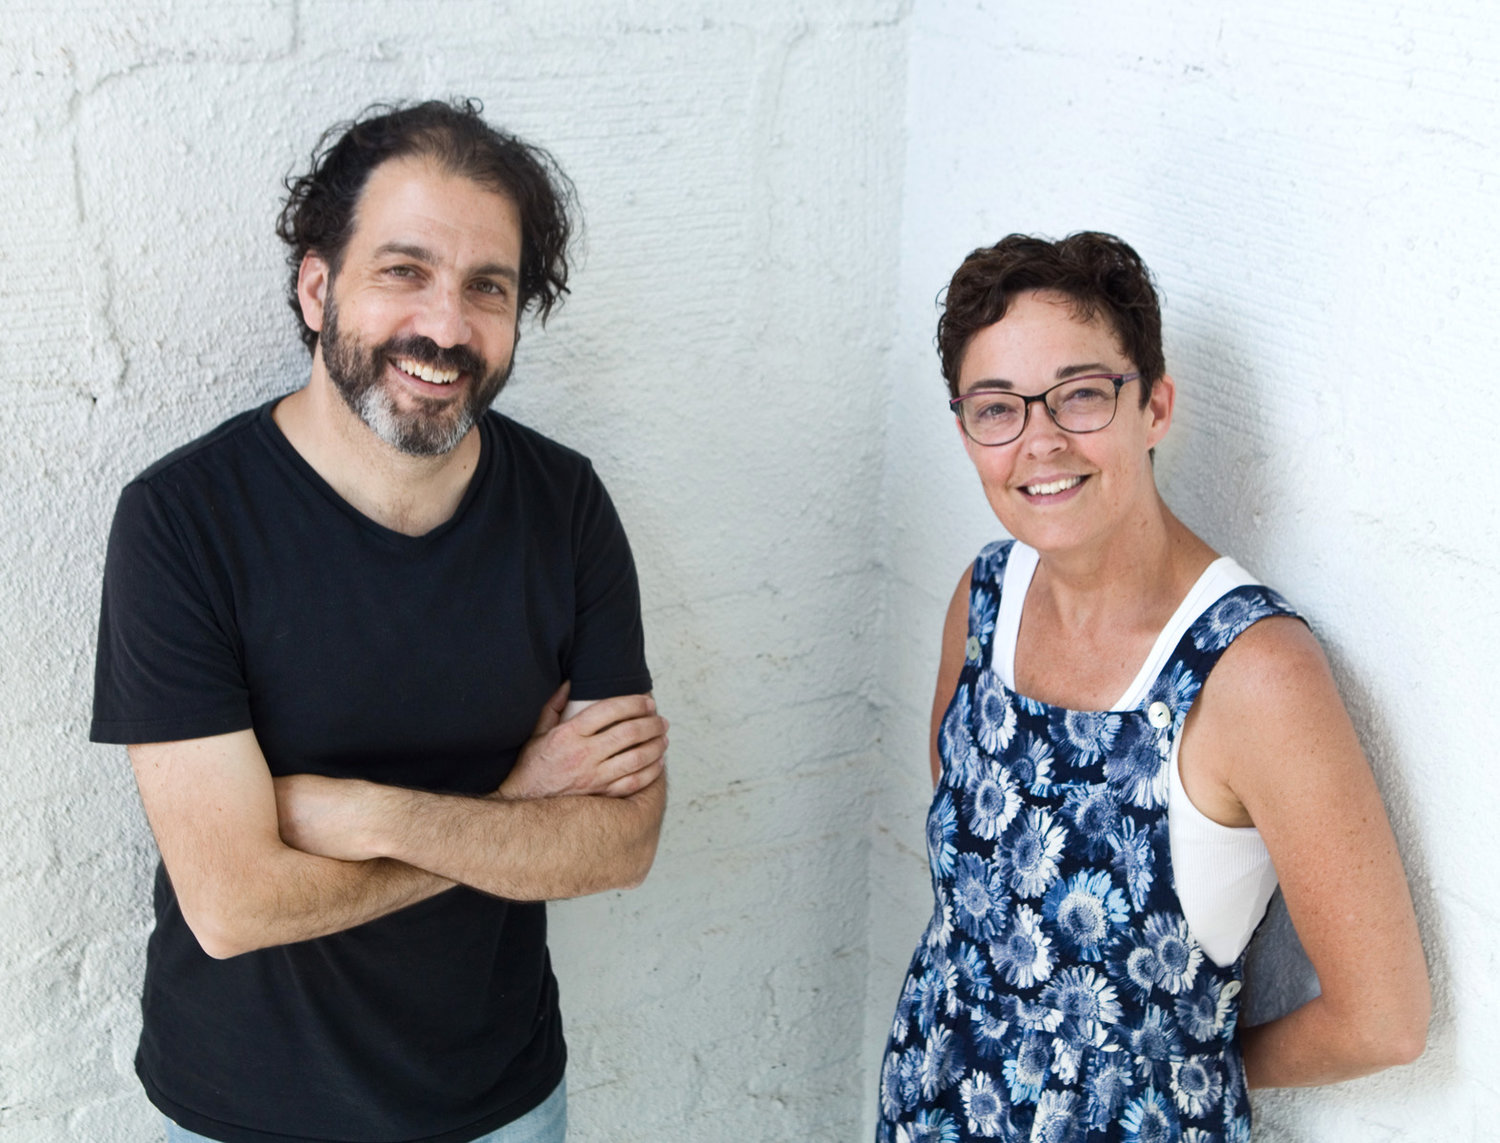 Alan Berks (left) and Leah Cooper (right) are co-artistic directors of Wonderlust Productions, located in Frogtown. Their 2016 play about the experience of adoption has been adapted into graphic novel form. (Photo by Margie O’Loughlin)